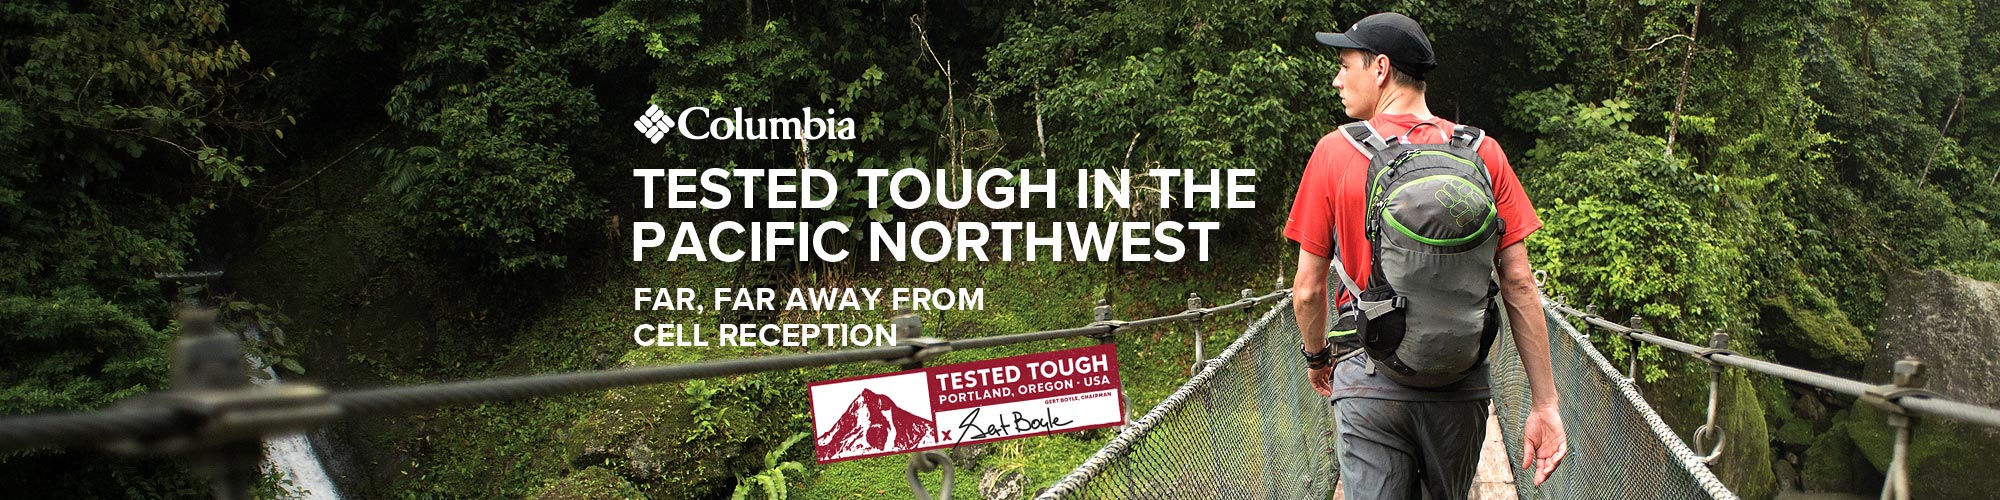 Tested tough in the Pacific Northwest. Far, far away from cell reception.